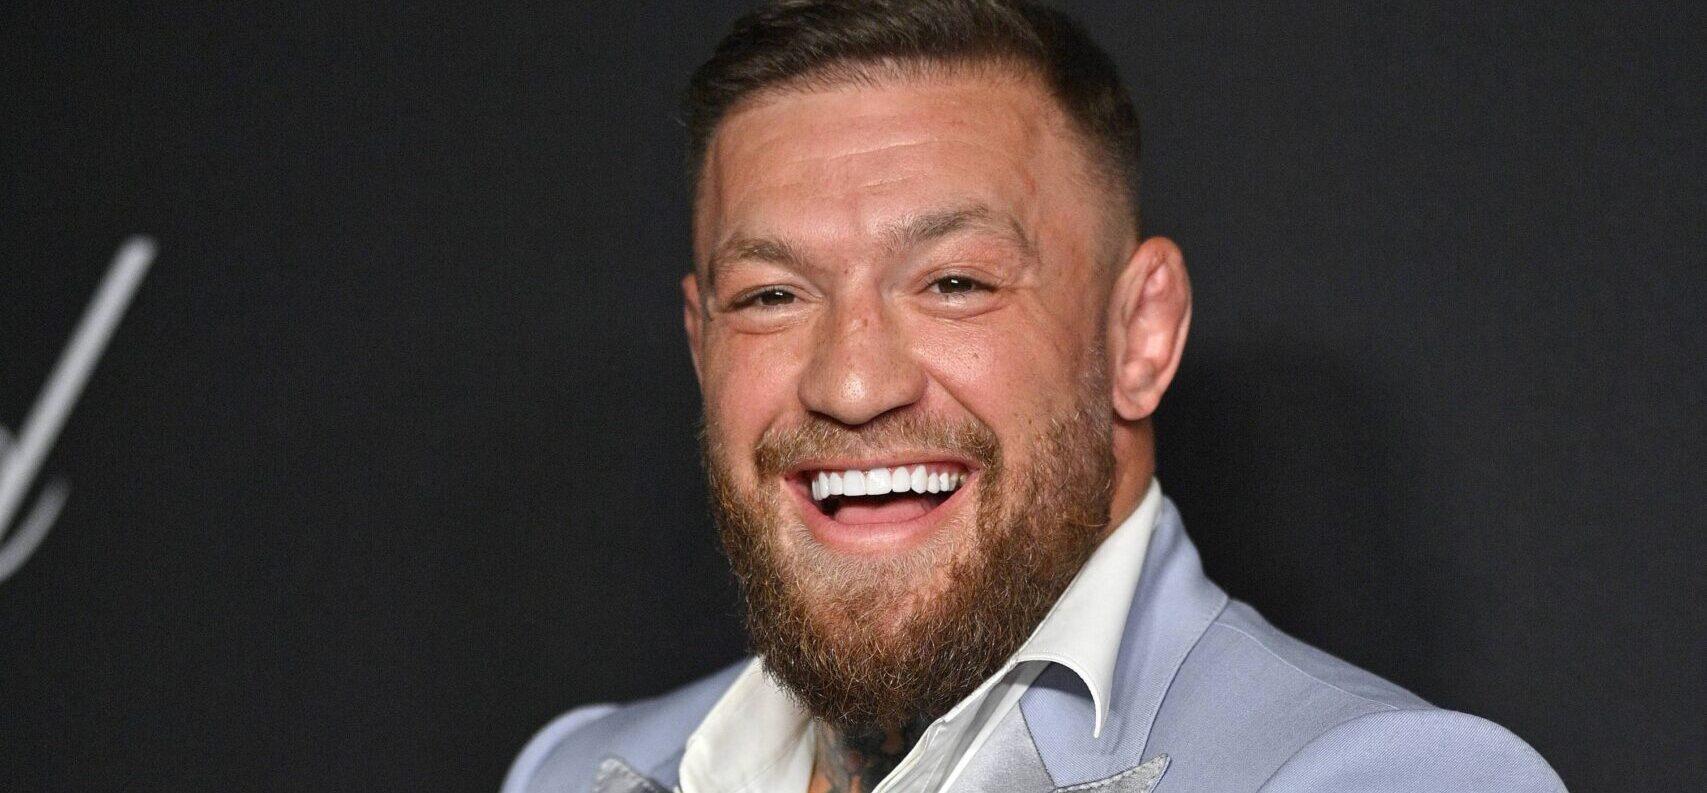 Dana White Gives Latest Update On Conor McGregor’s UFC Return